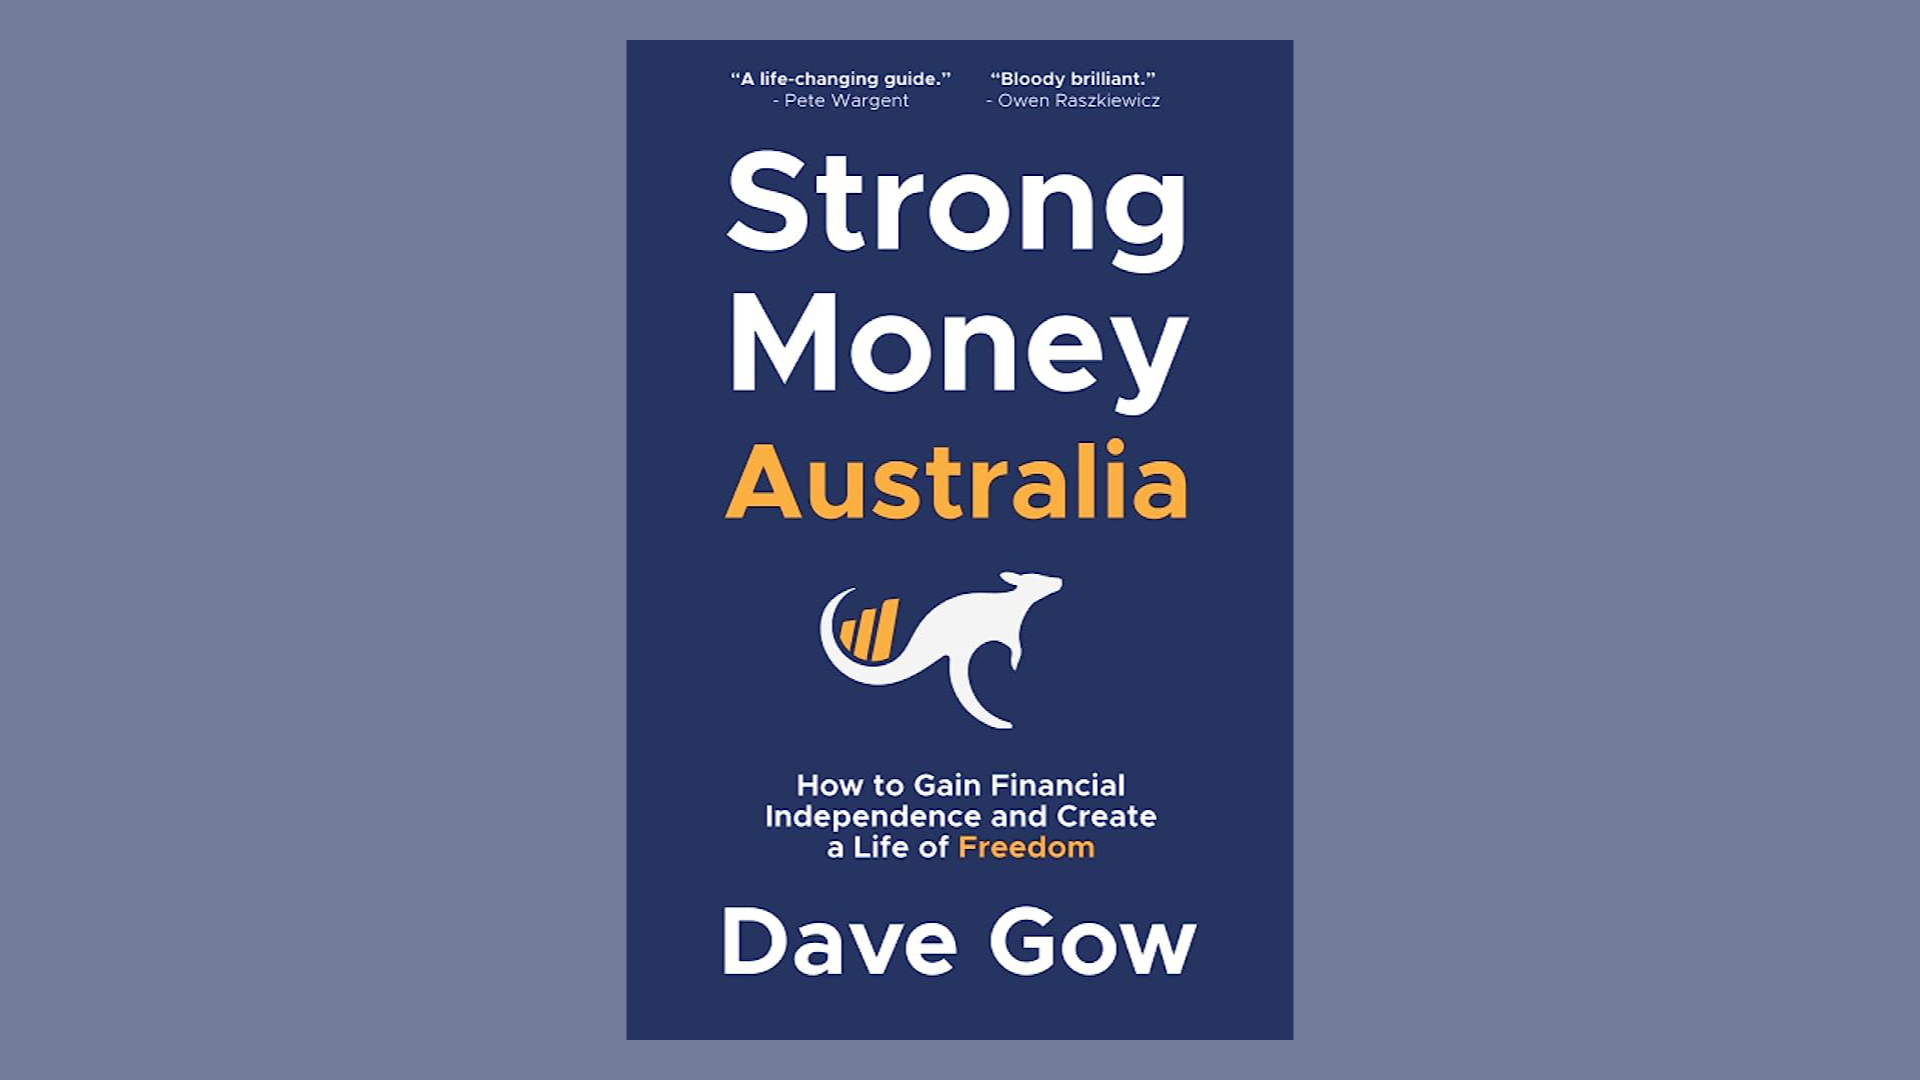 Dave's book - Strong Money Australia: How to Gain Financial Independence and Create a Life of Freedom.